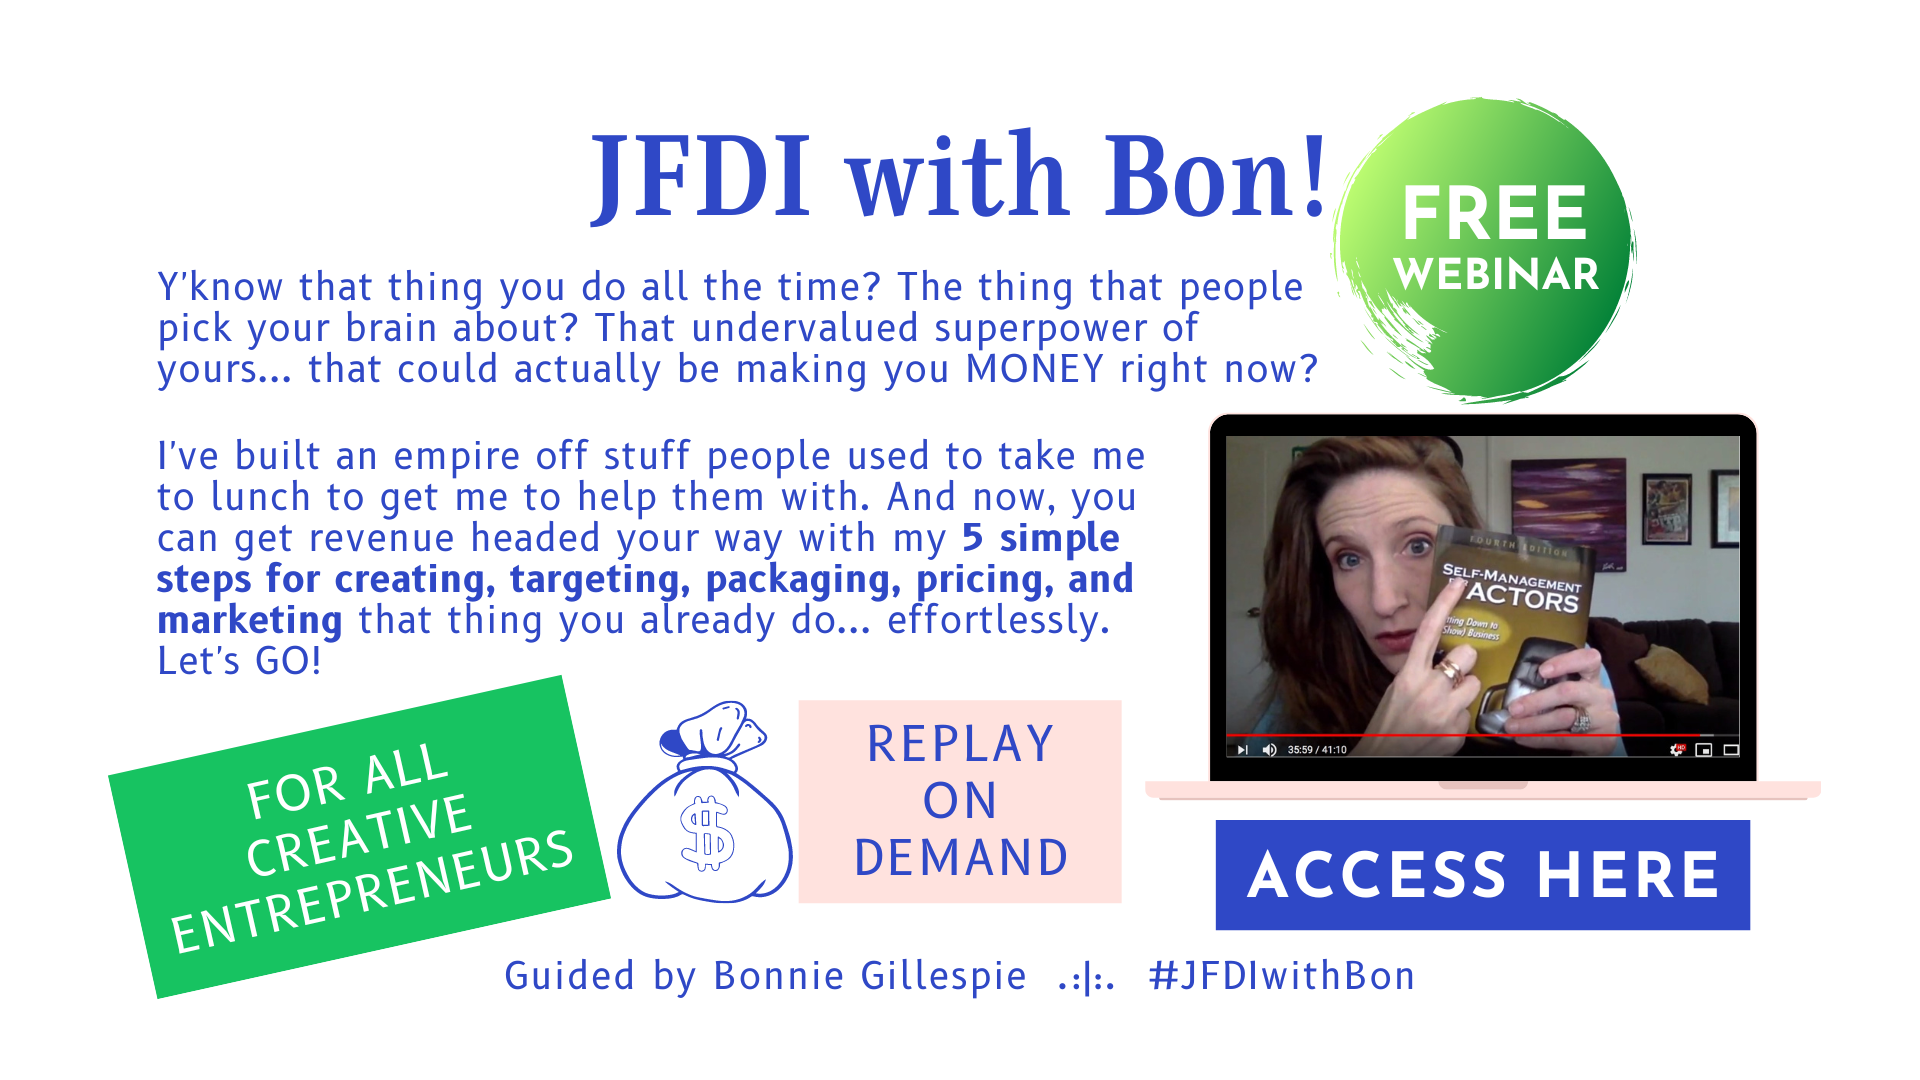 text about the free creative entrepreneur webinar JFDI with Bon - photo of Bonnie Gillespie holding up Self-Management for Actors during a livestream - button to access on-demand webinar now